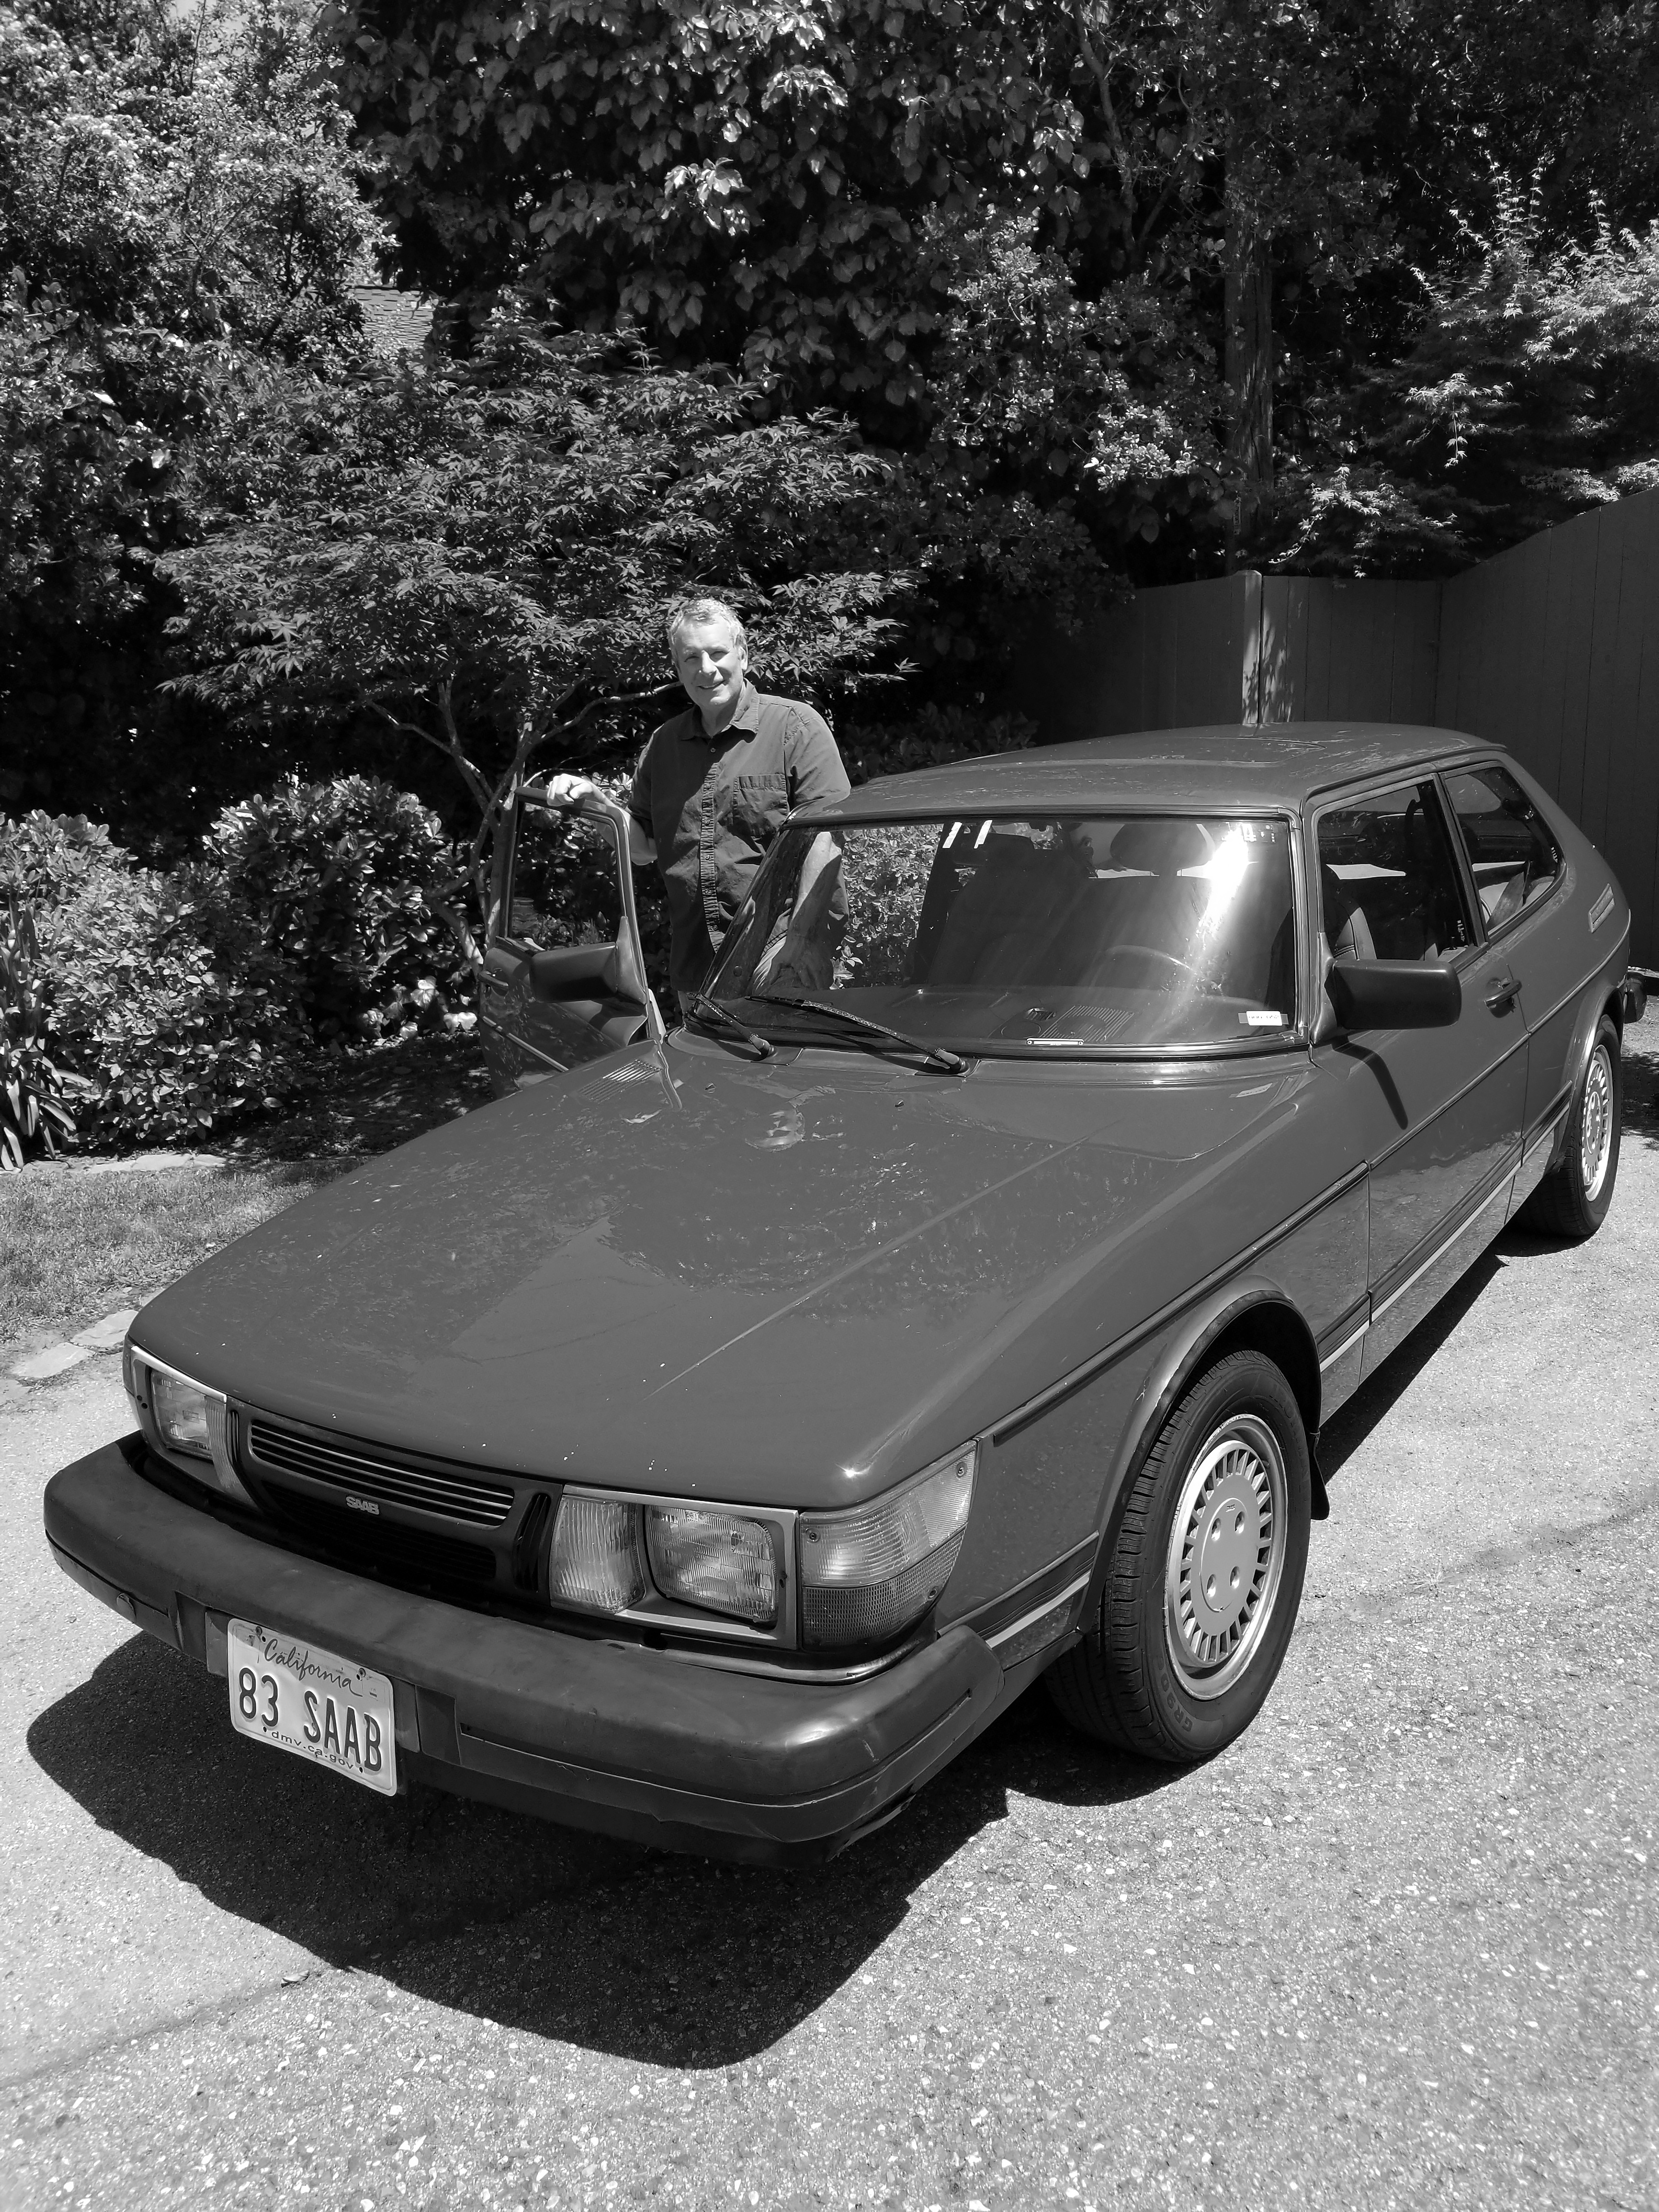 Chapter Seven: My Saab Story